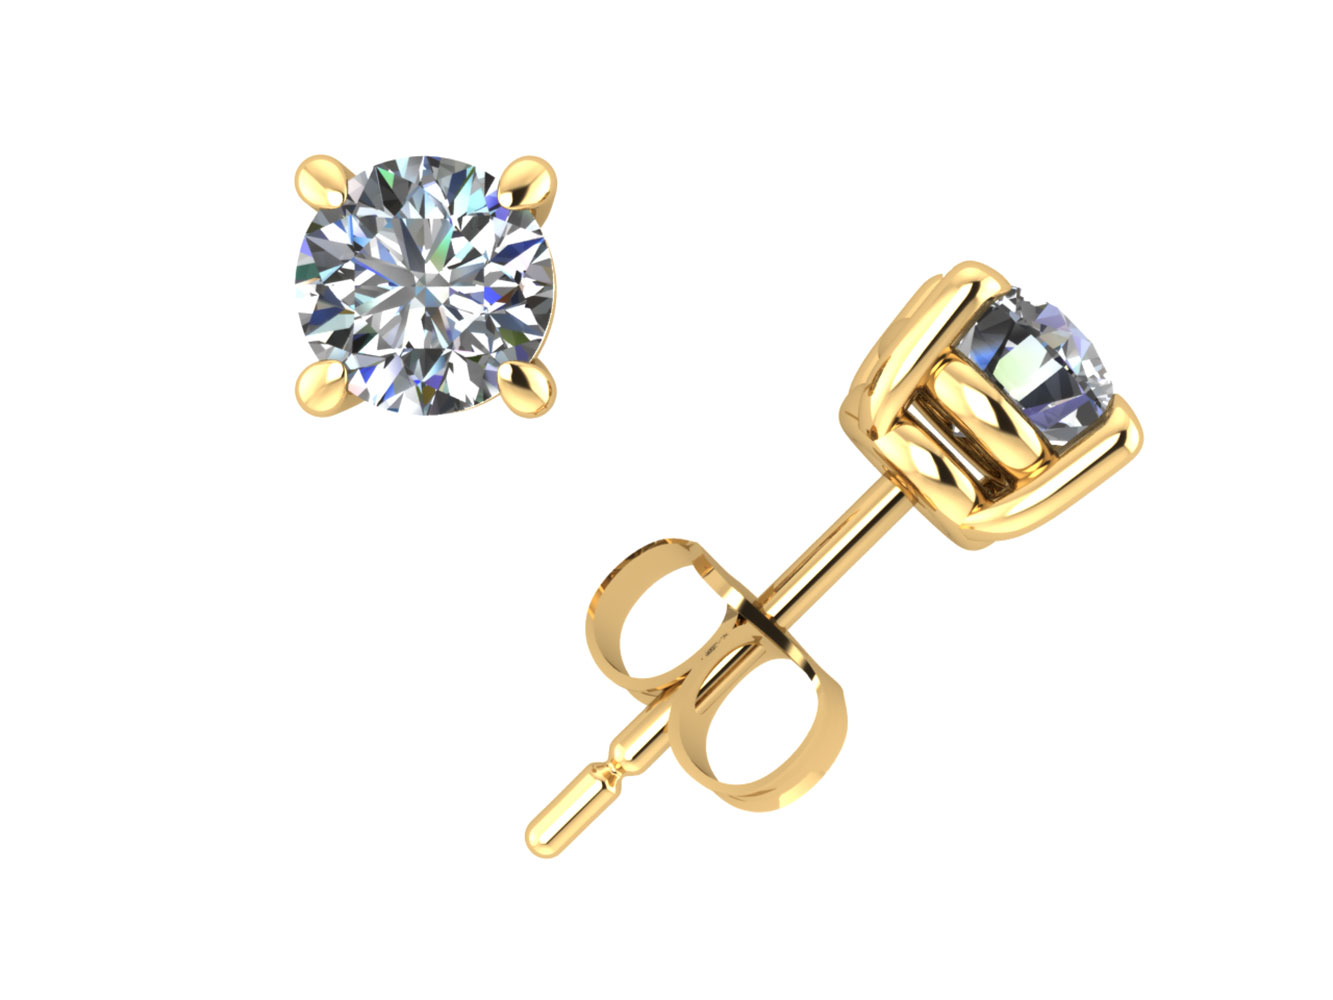 Jewel We Sell 0.50Ct Round Diamond Basket Solitaire Stud Earrings 14k White or Yellow Gold Prong H SI2